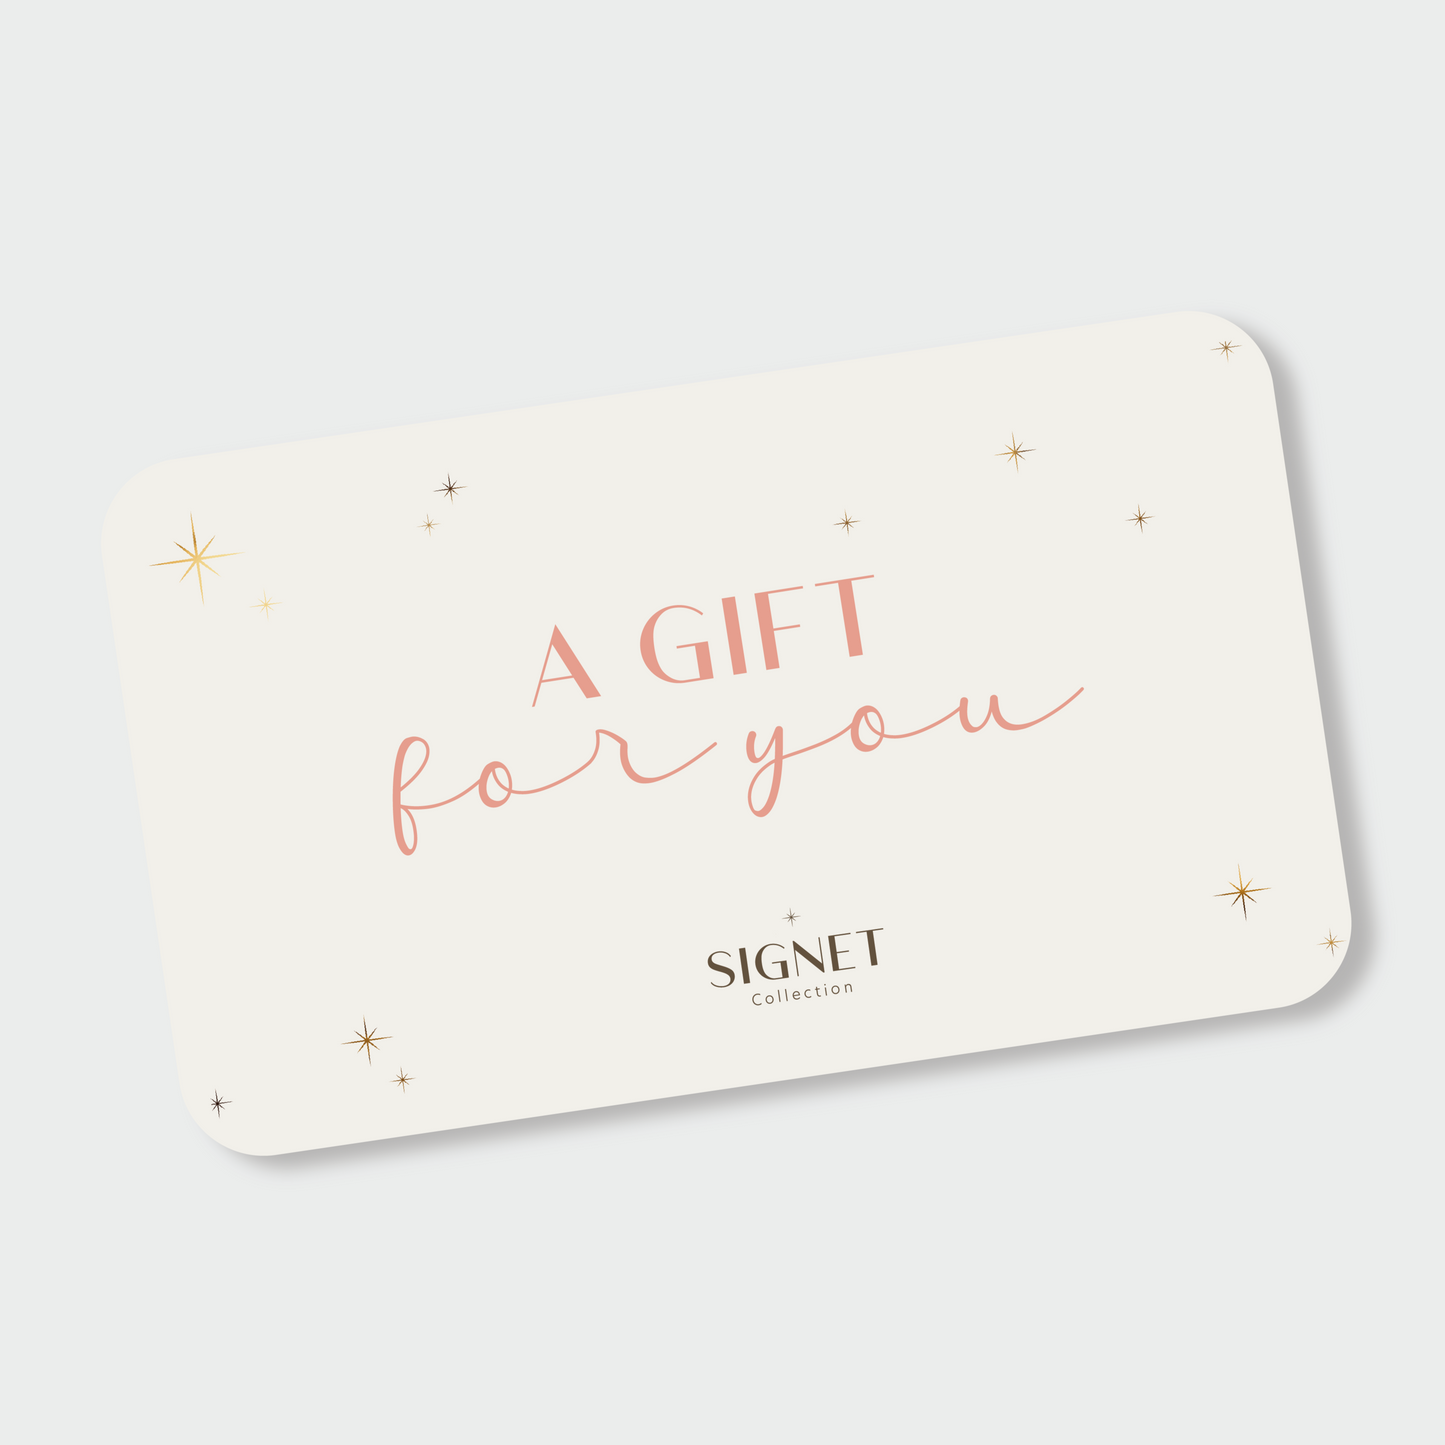 Signet Collection digital gift card